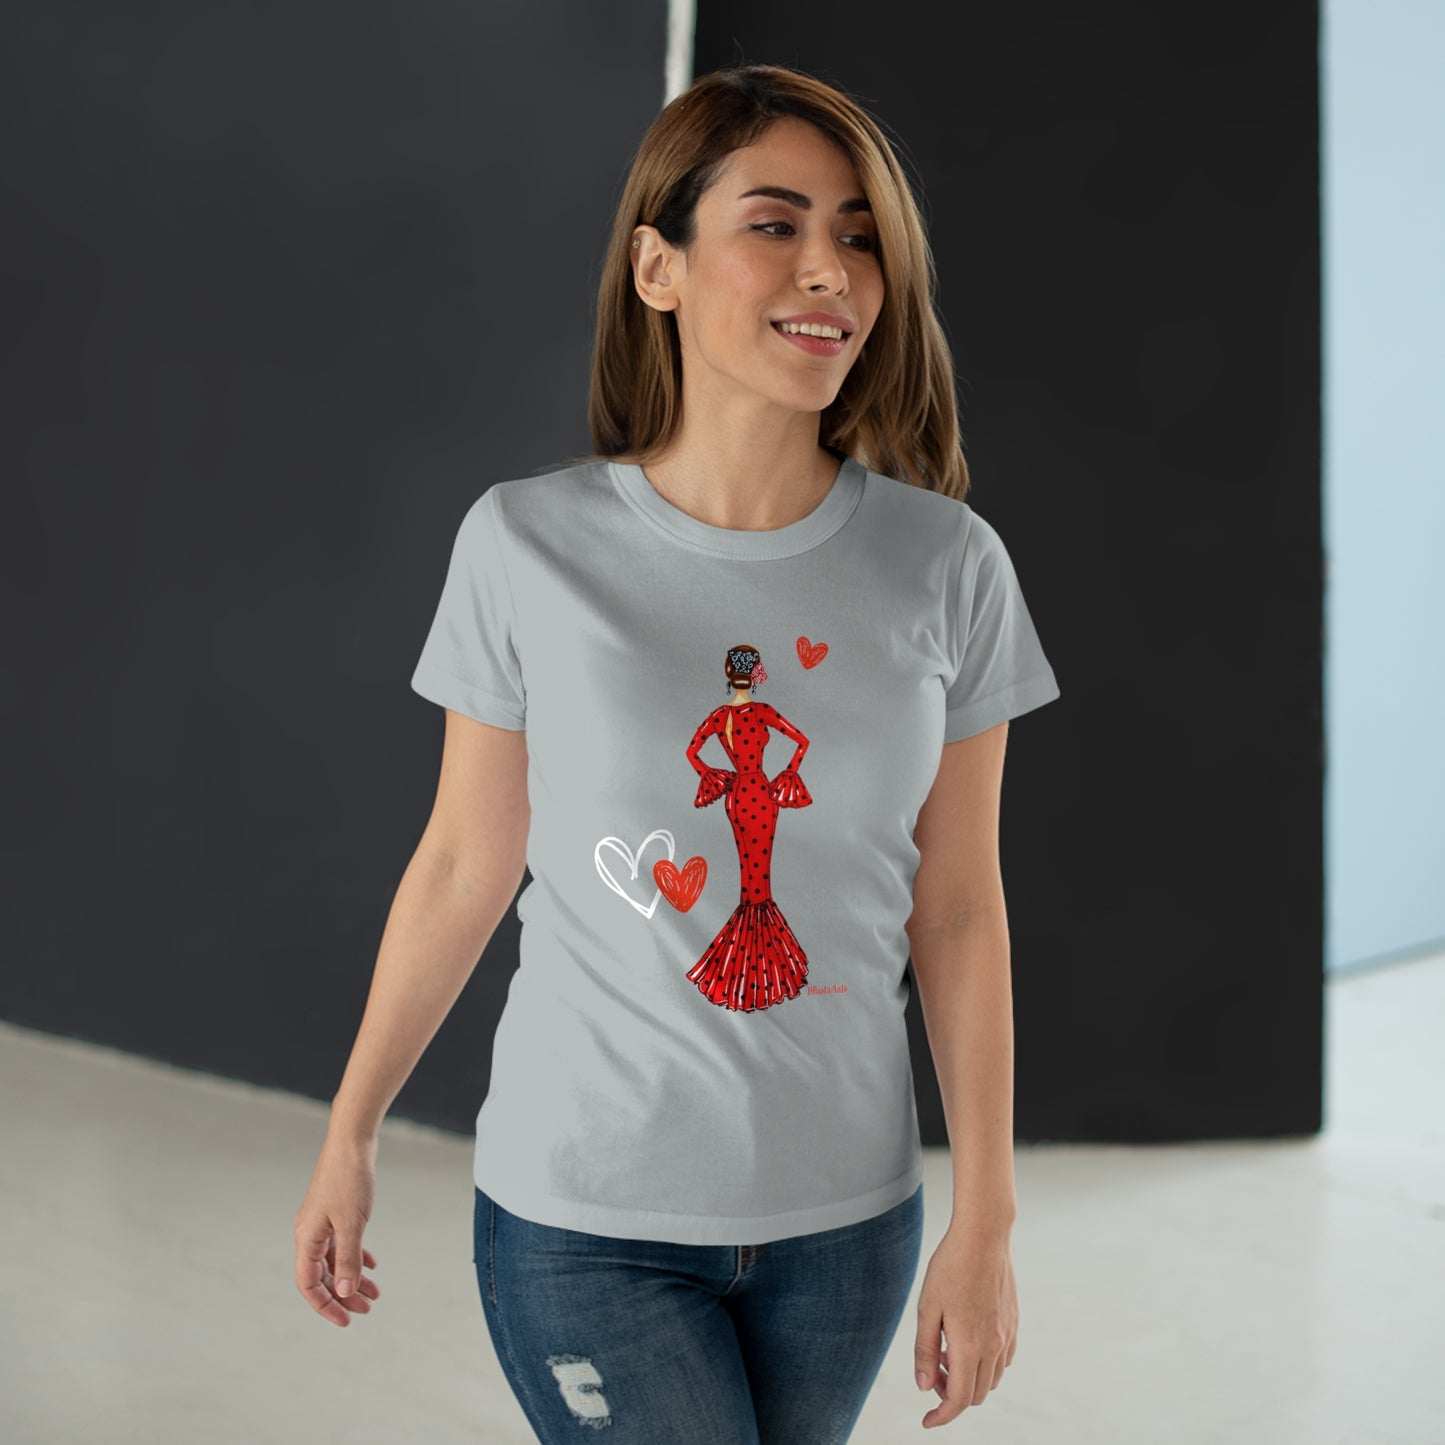 a woman wearing a t - shirt with a red dress and heart on it